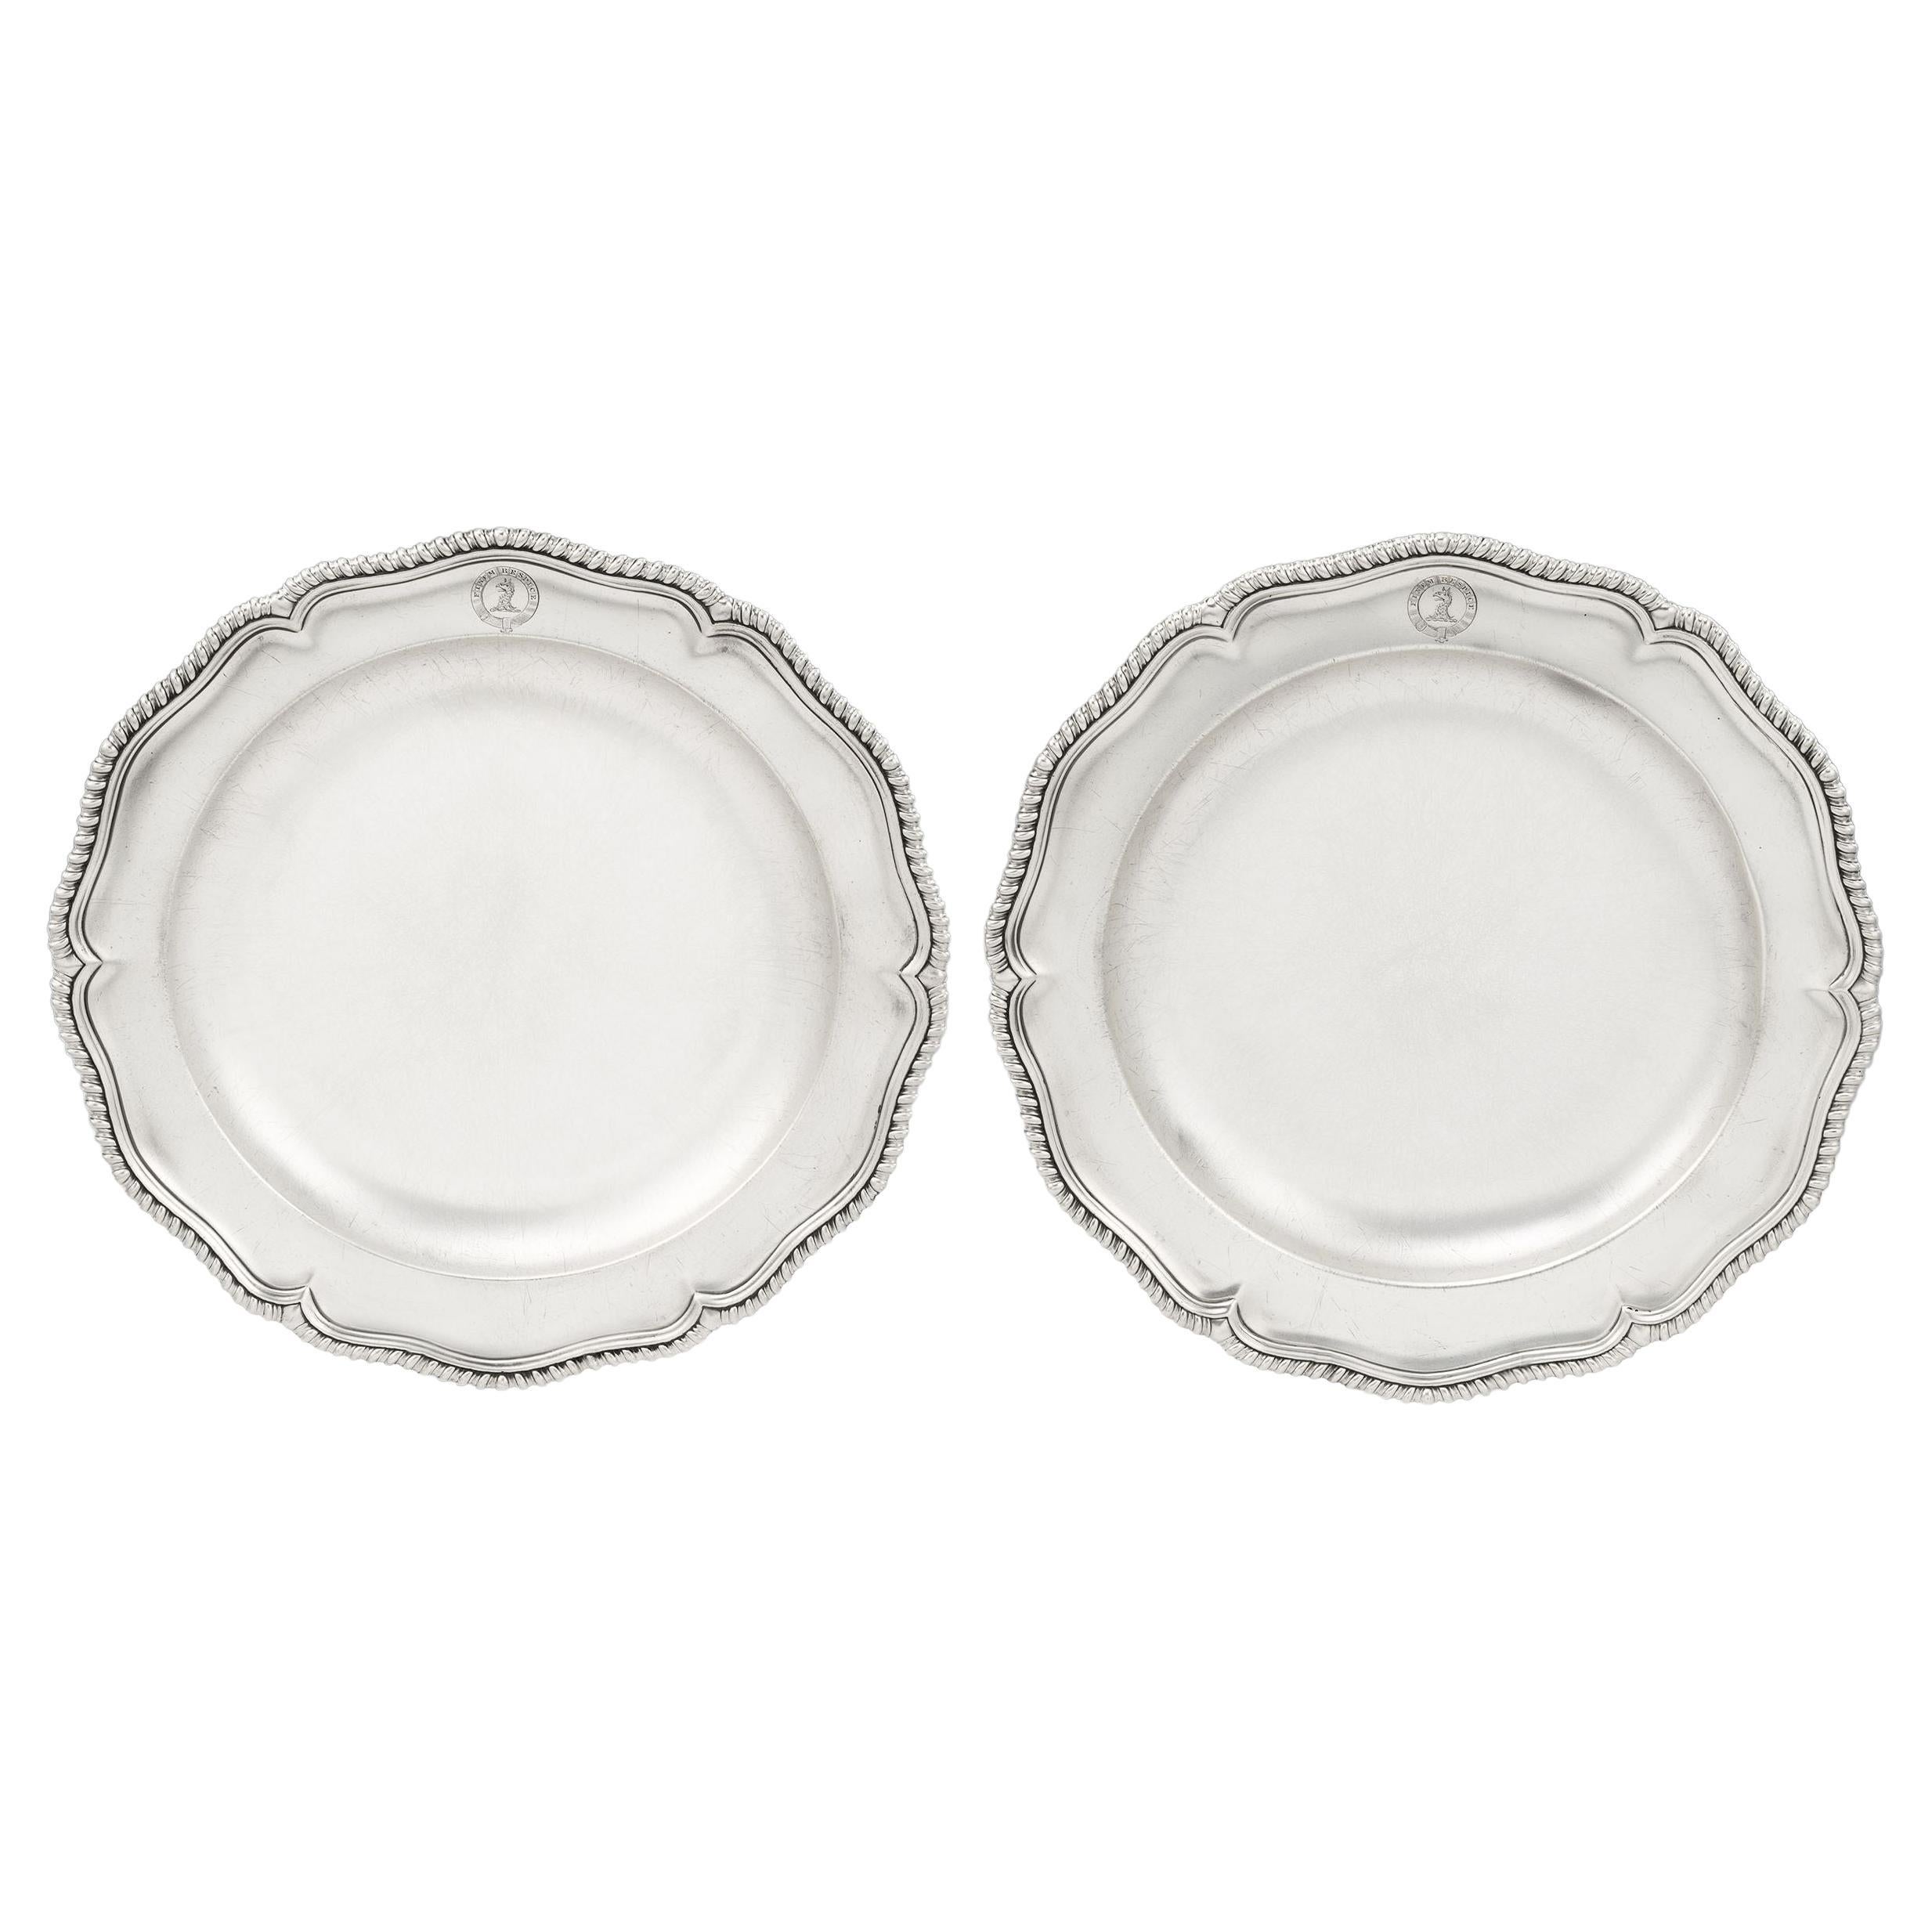 Pair of George II Serving Dishes Made in London in 1759 by William Cripps